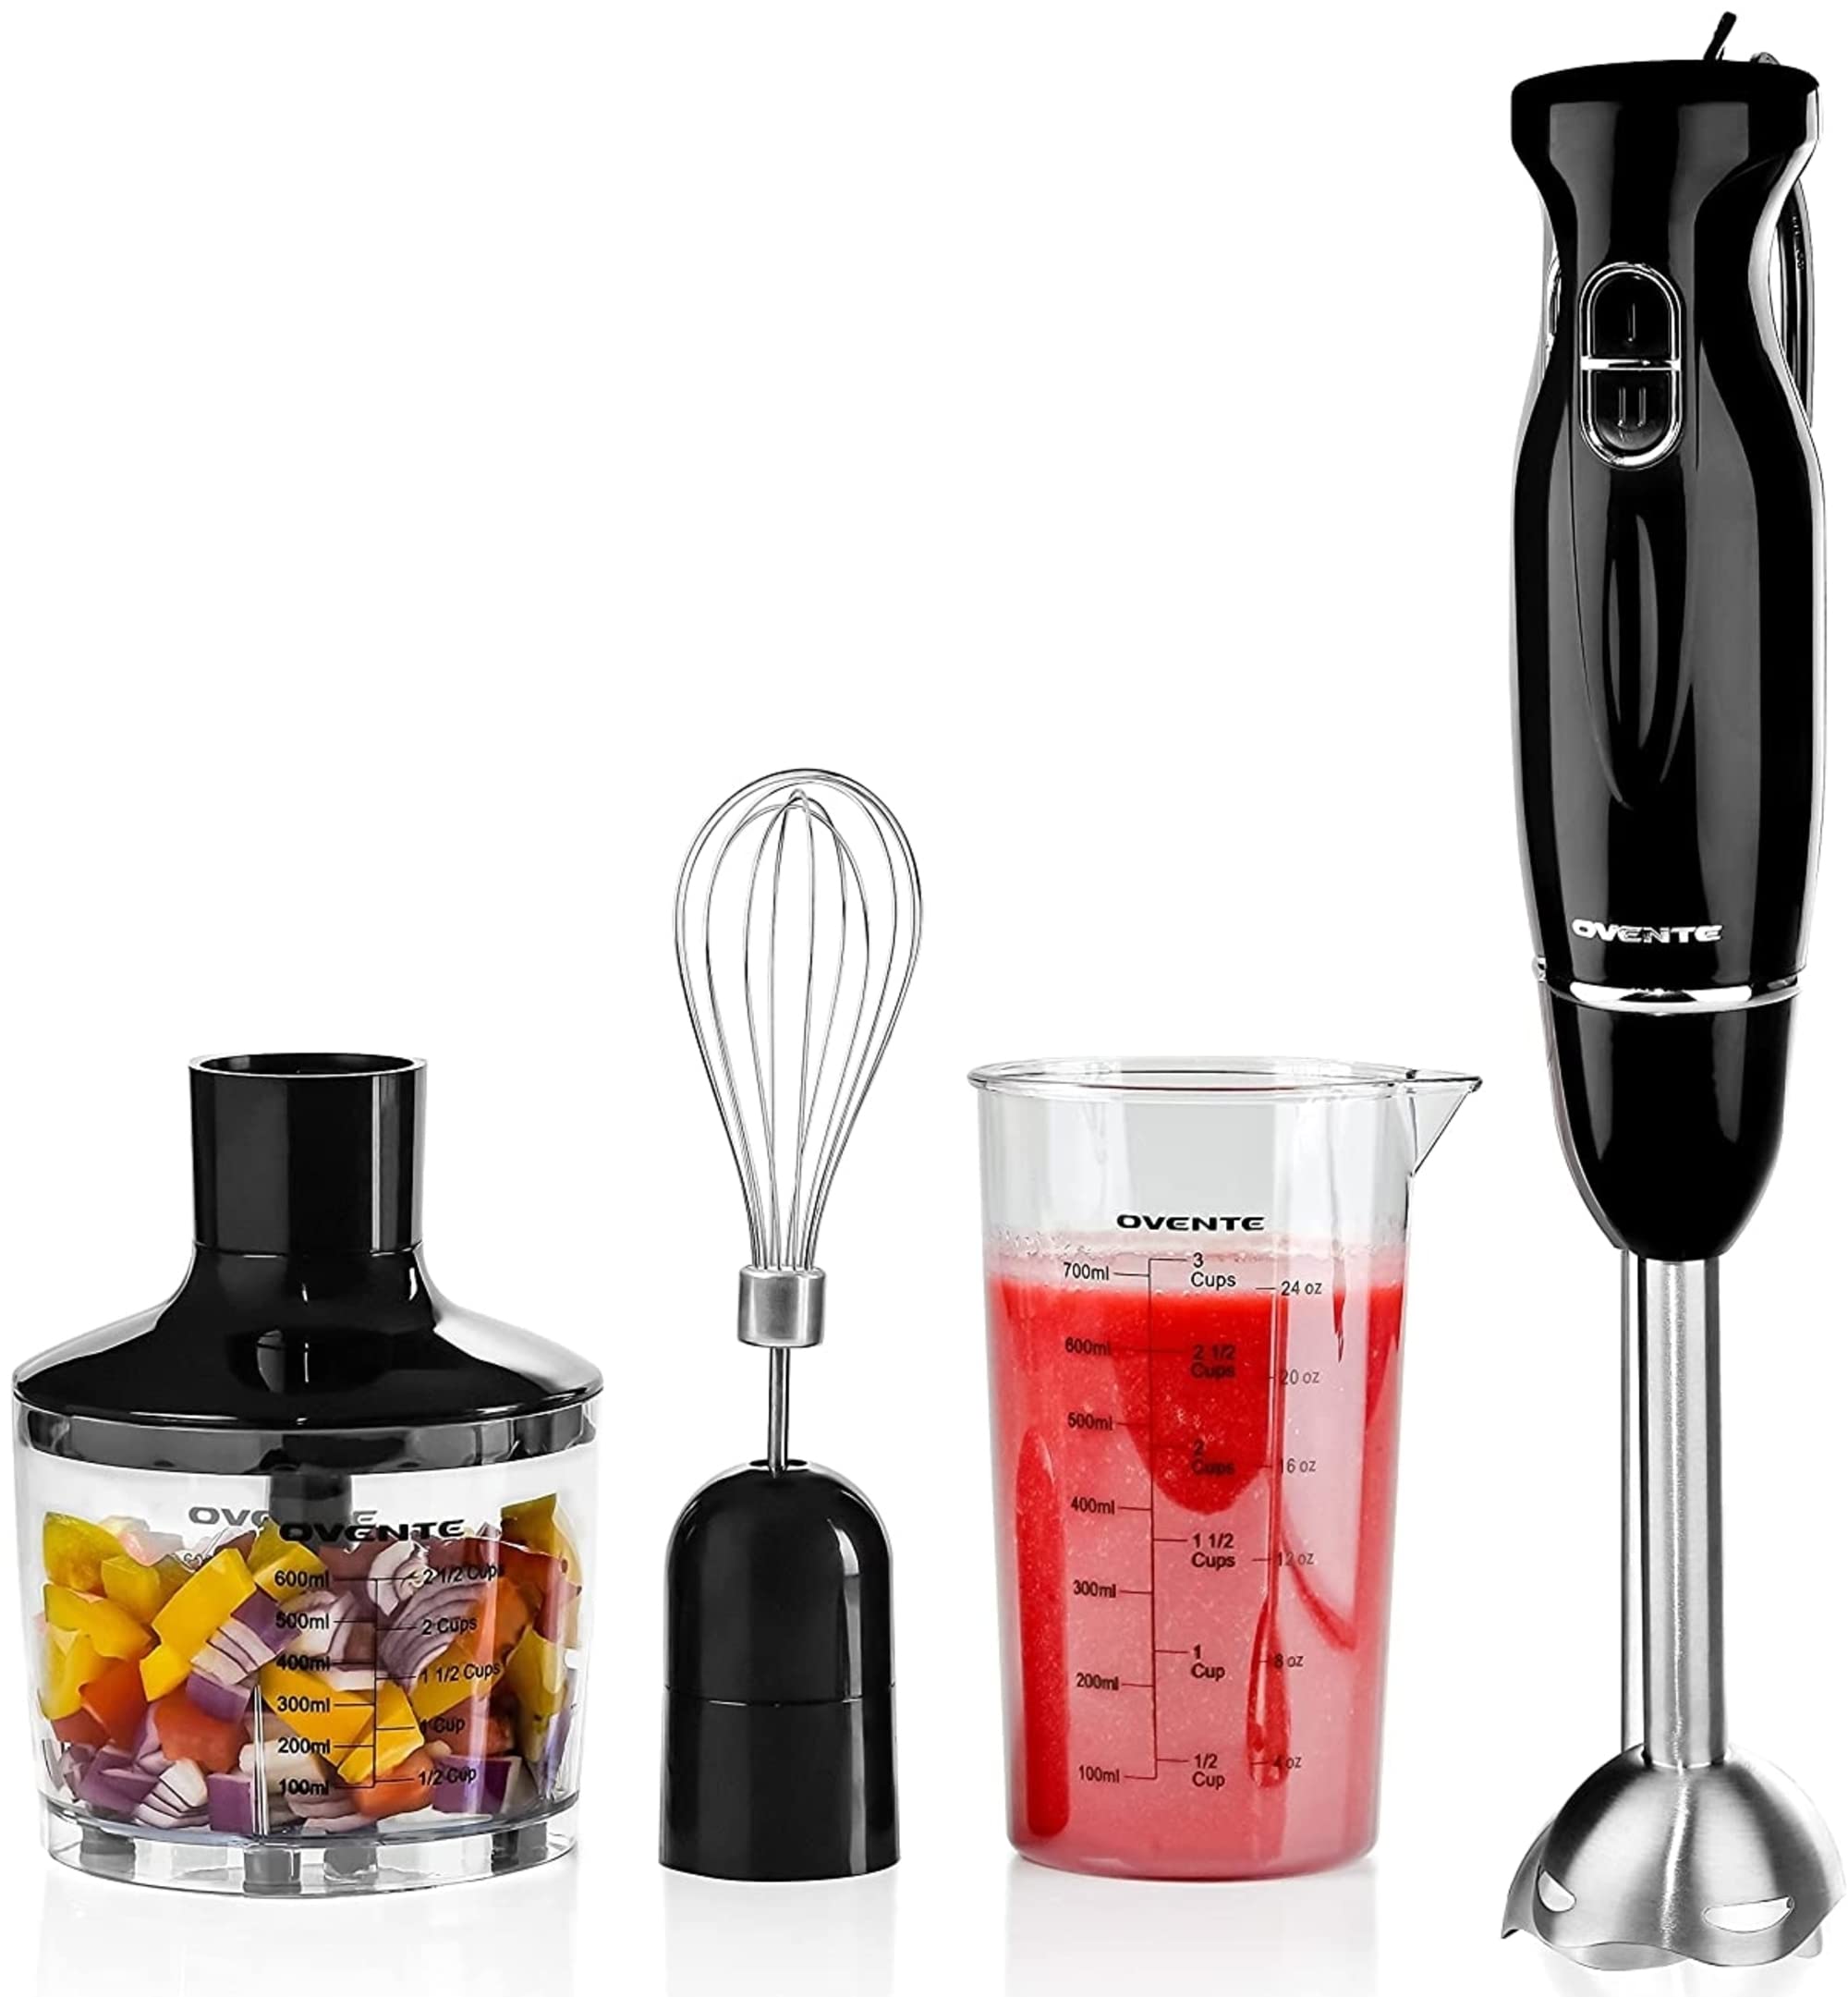 Ovente Immersion Electric Hand Blender w/ Stainless Steel Blades, Egg Whisk Attachment, Mixing Beaker & BPA-Free Food Chopper (Black HS565B) $20 + Free Shipping w/ Prime or on $35+